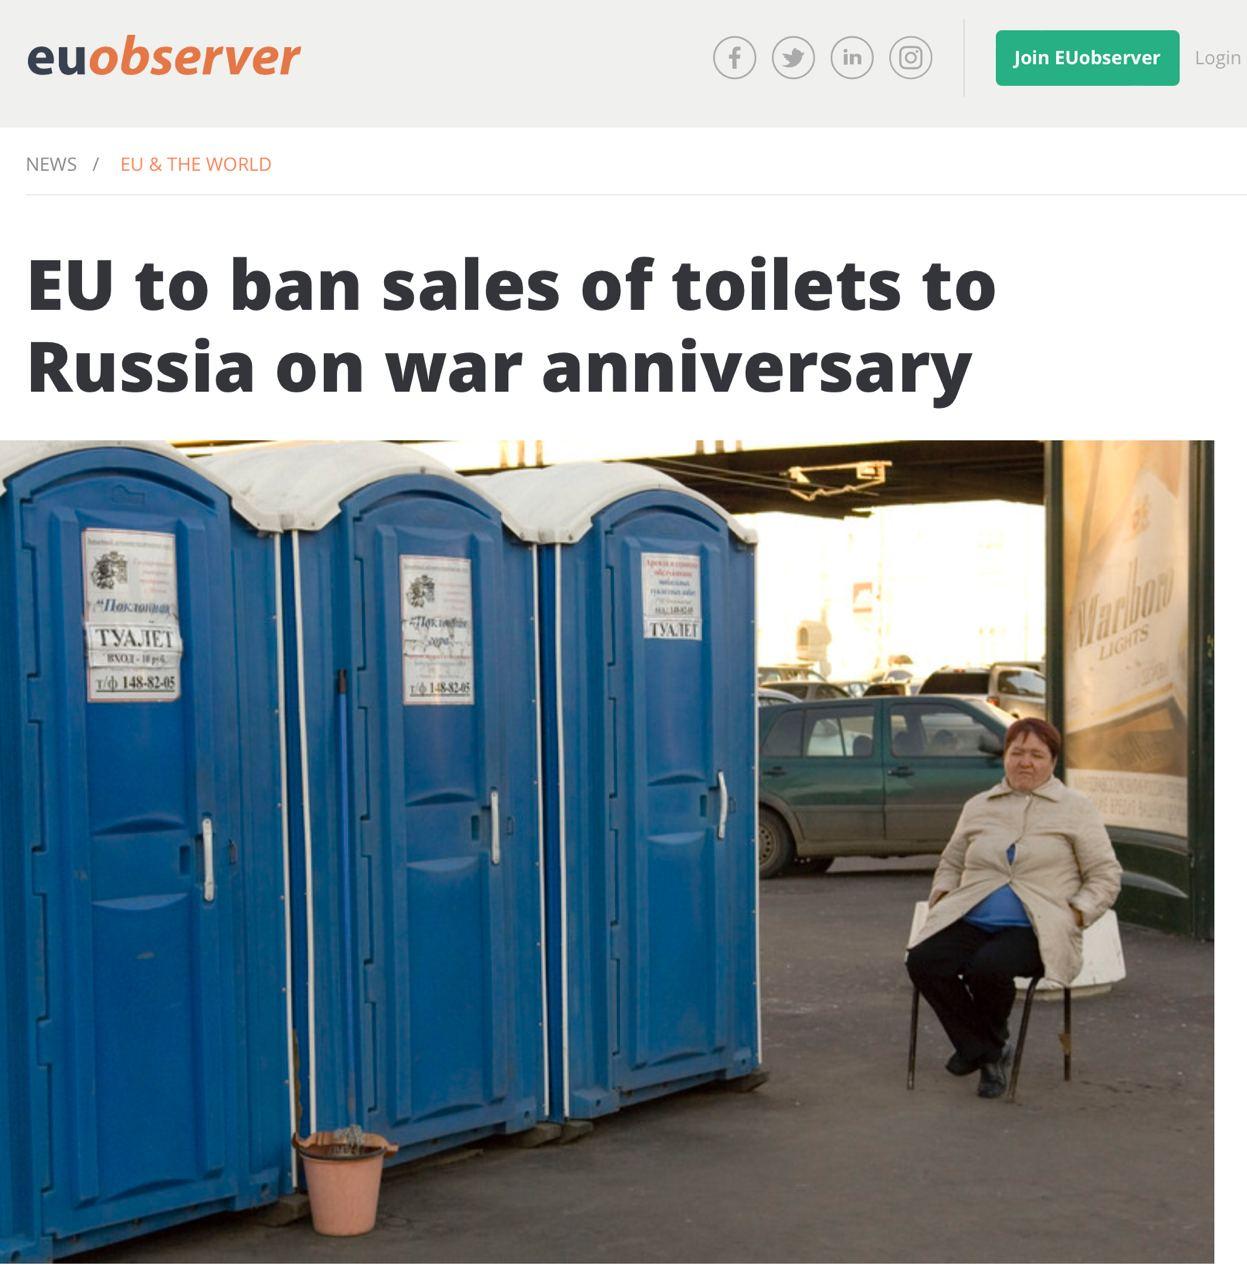 The EU will ban the sale of toilets to Russia on the anniversary of the war